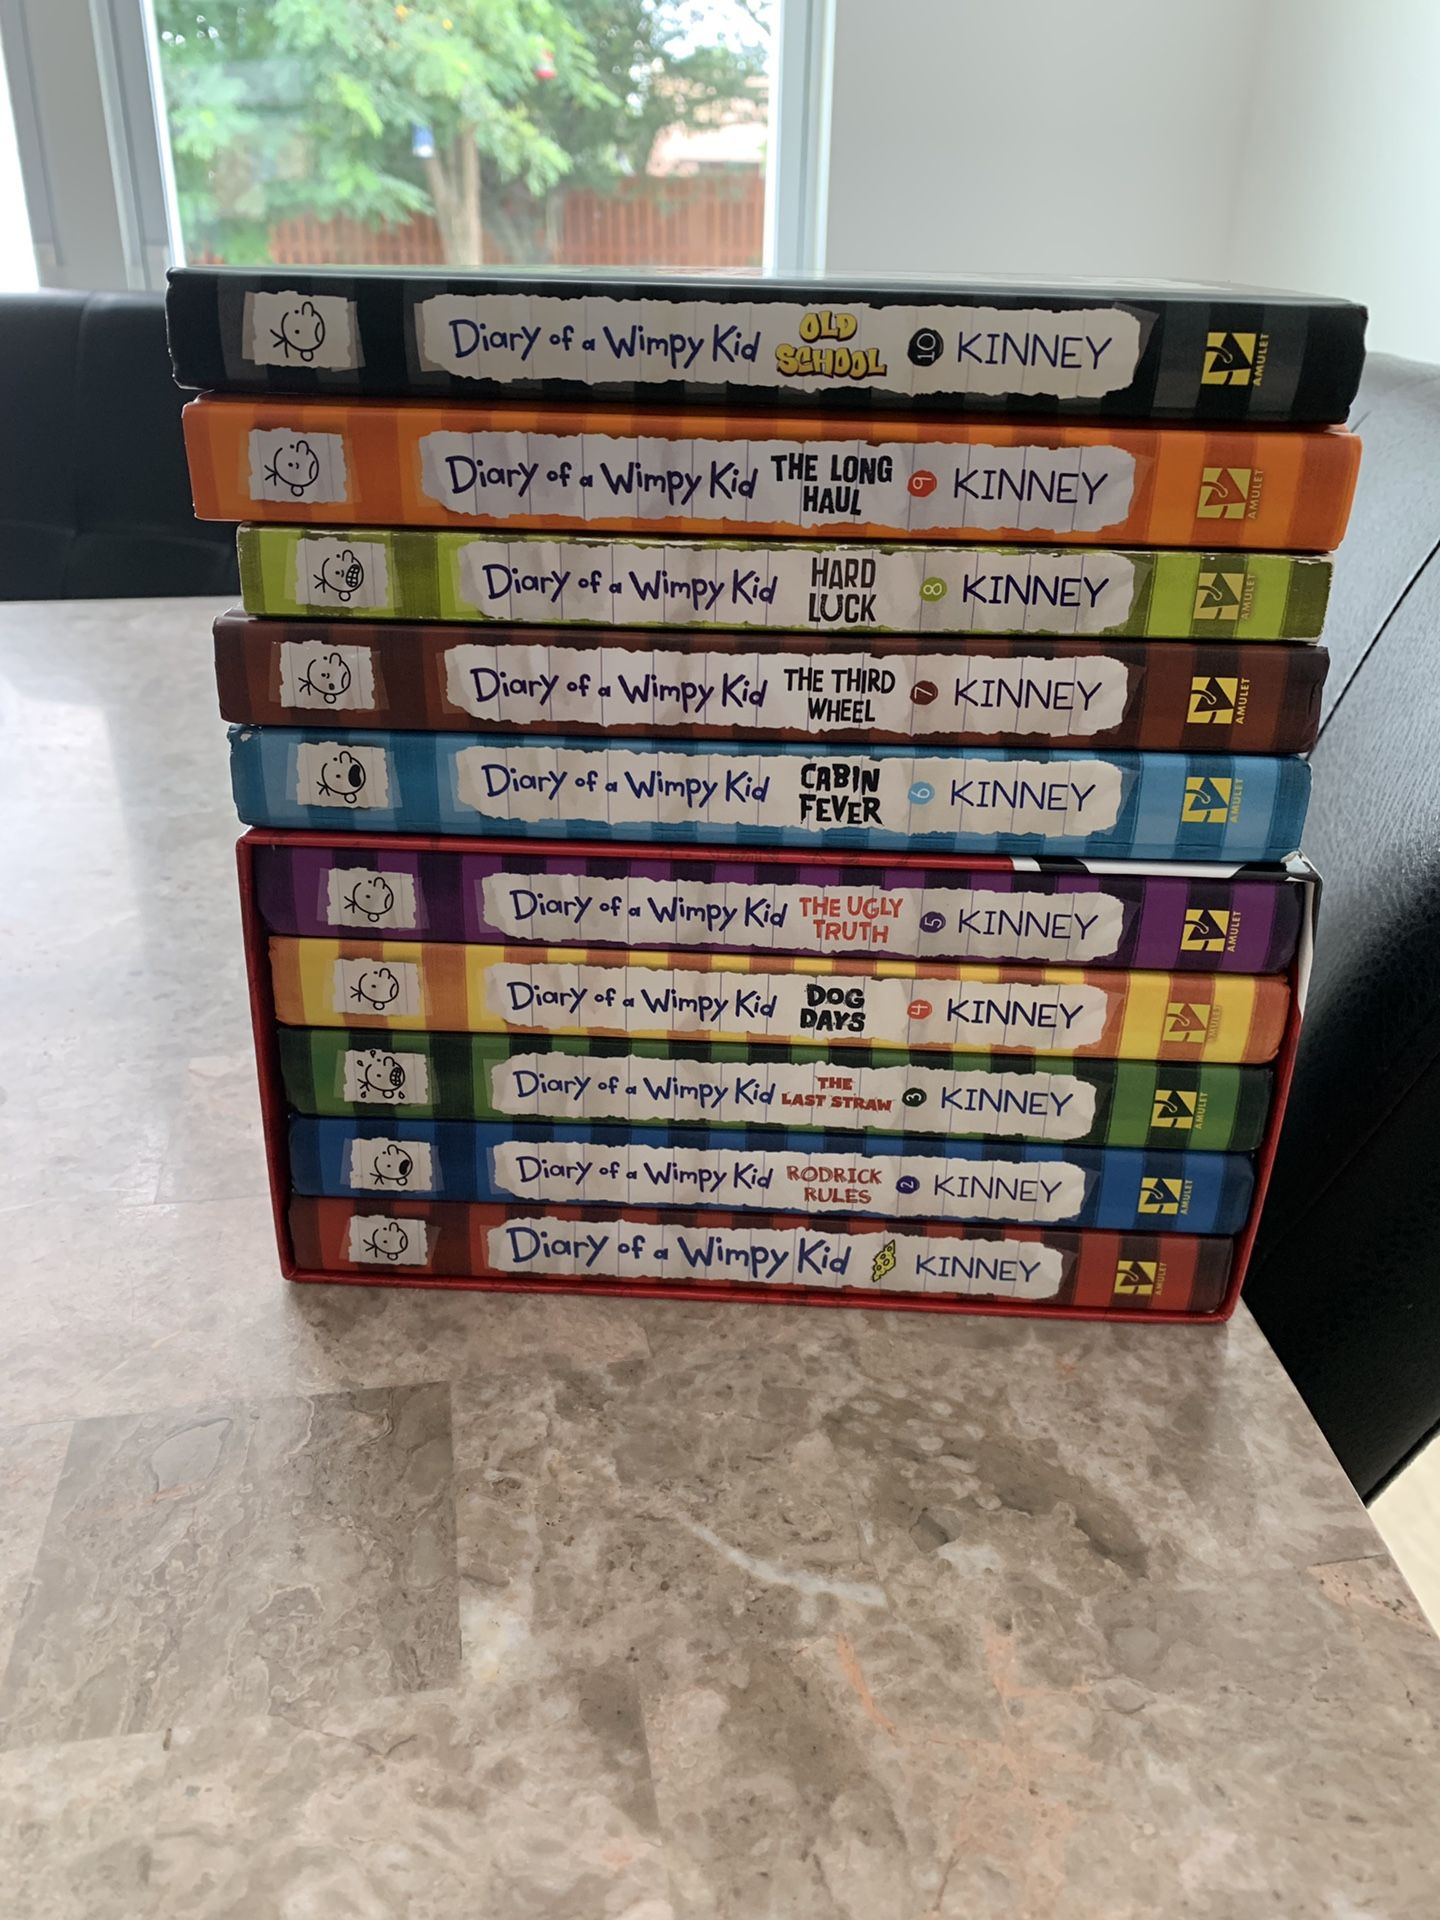 Diary of a wimpy kid box set series